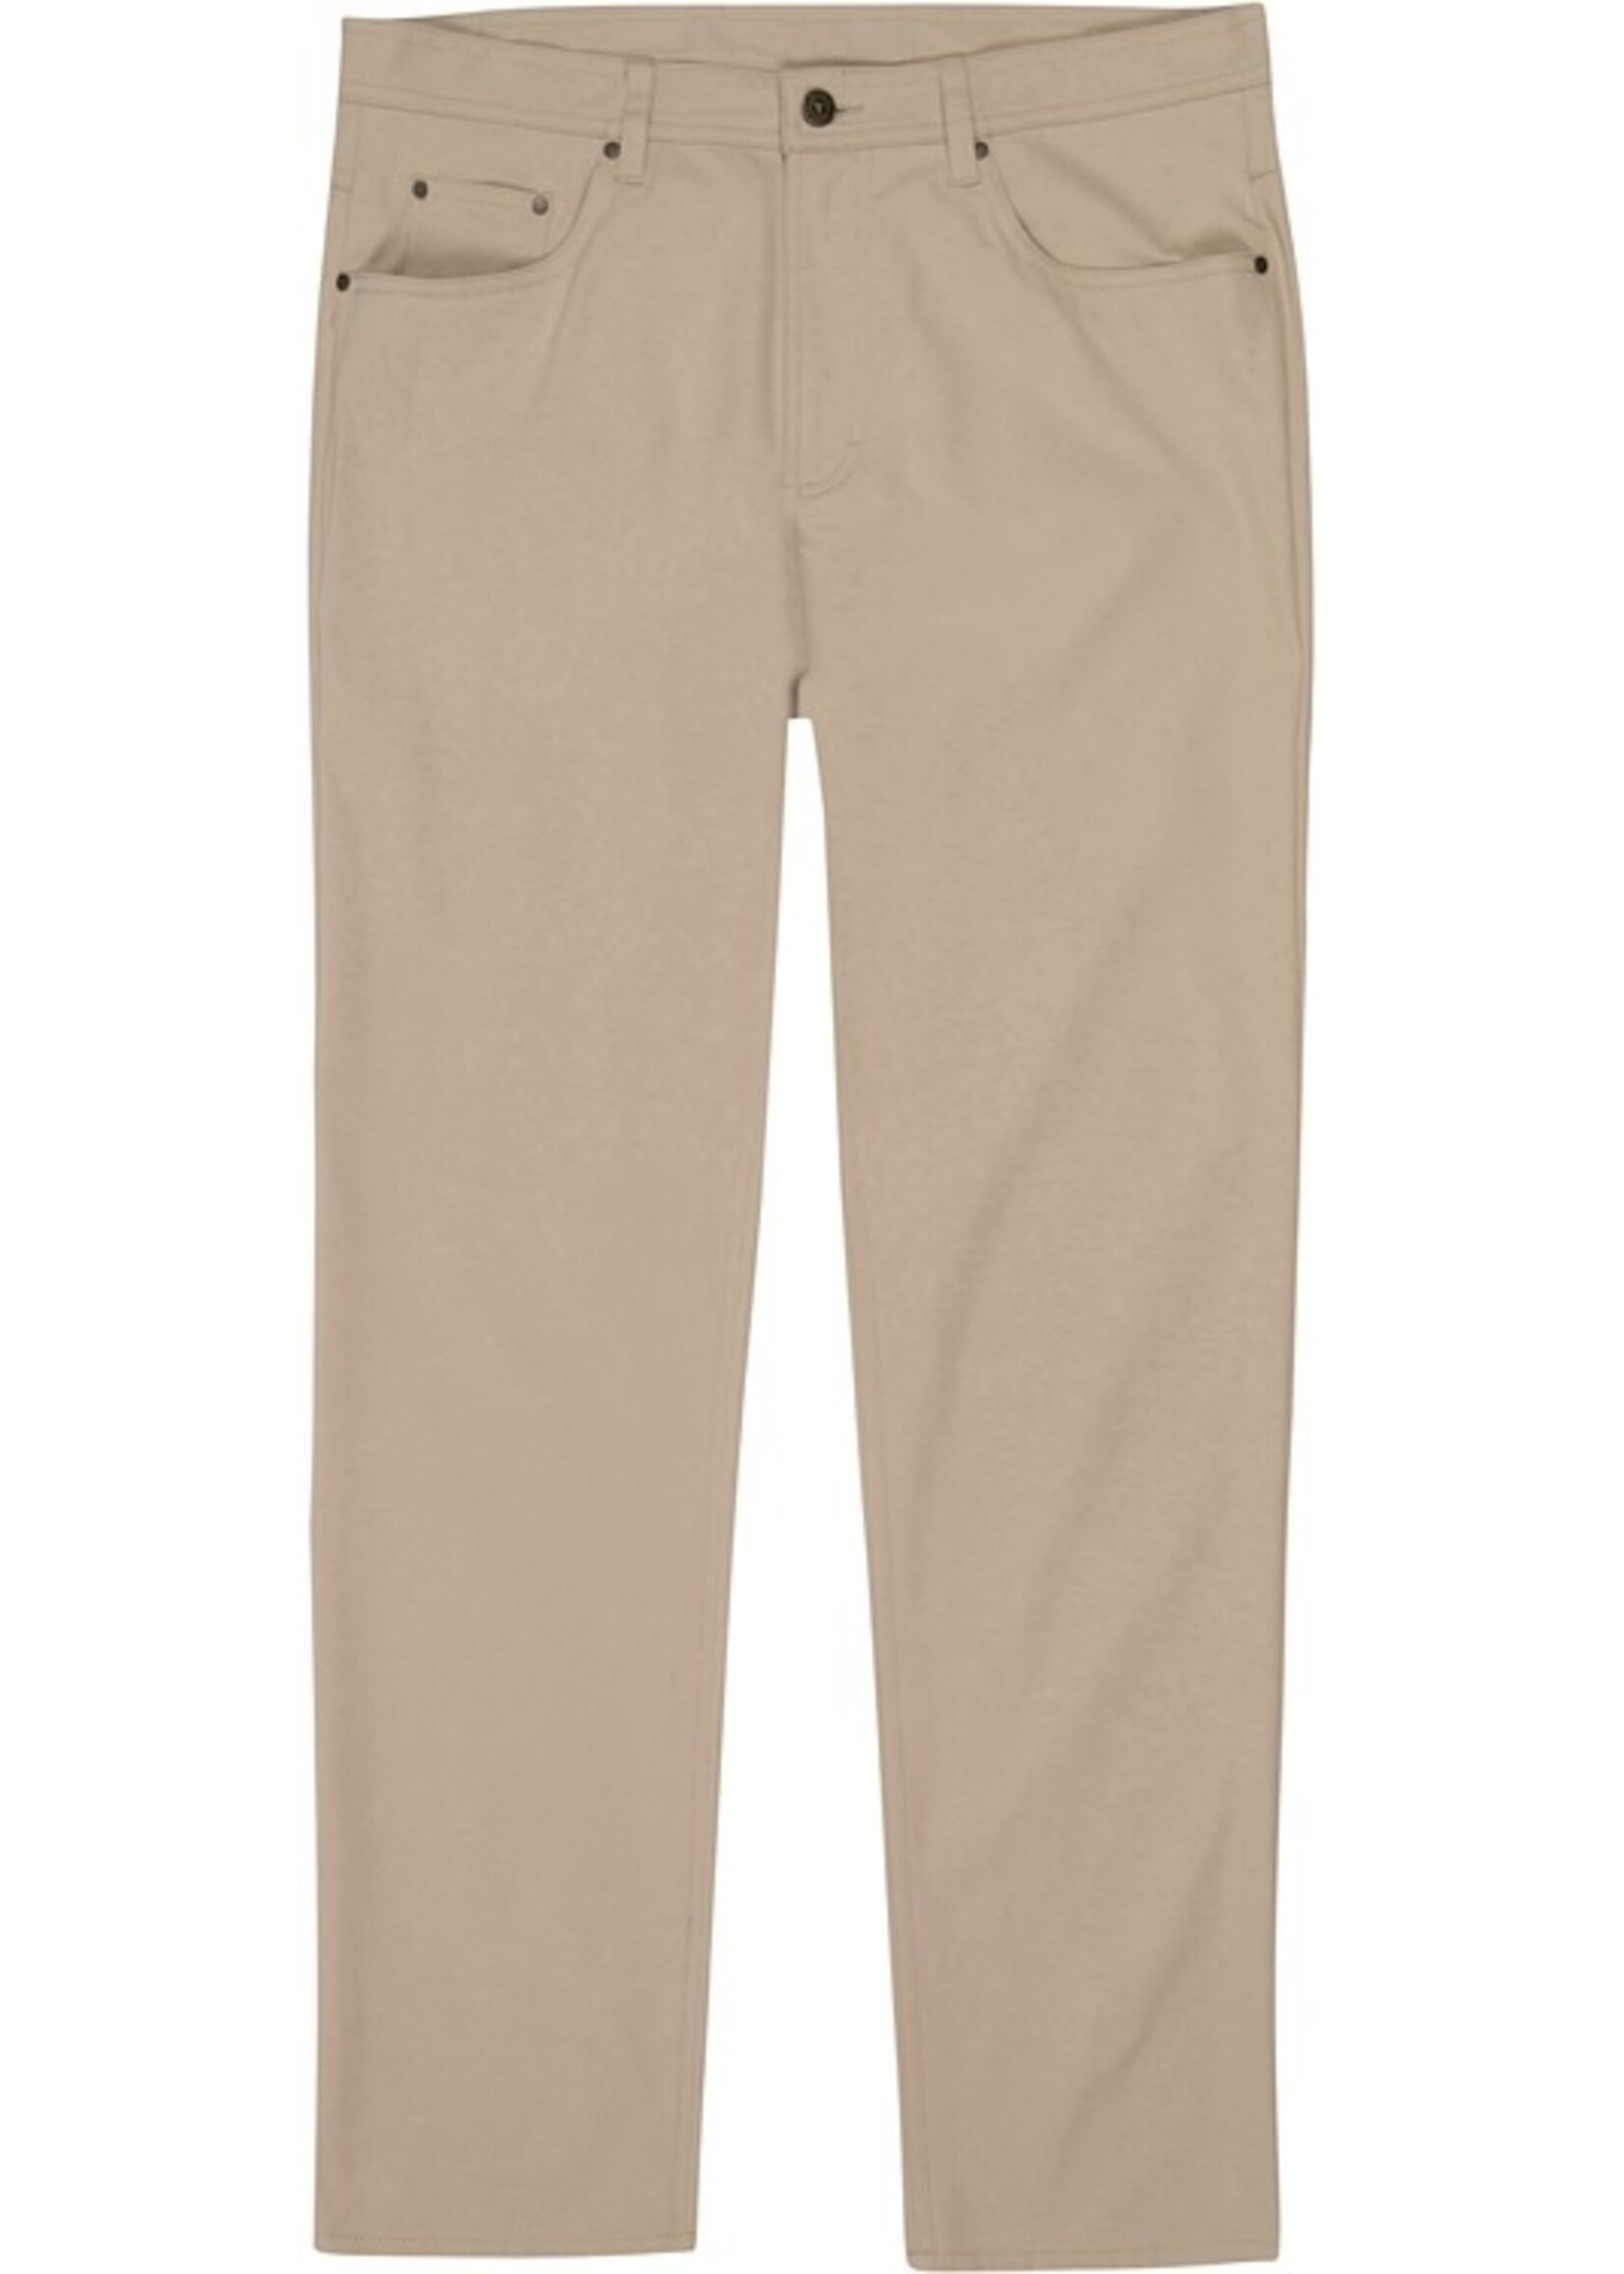 GenTeal Apparel Clubhouse Stretch Pant